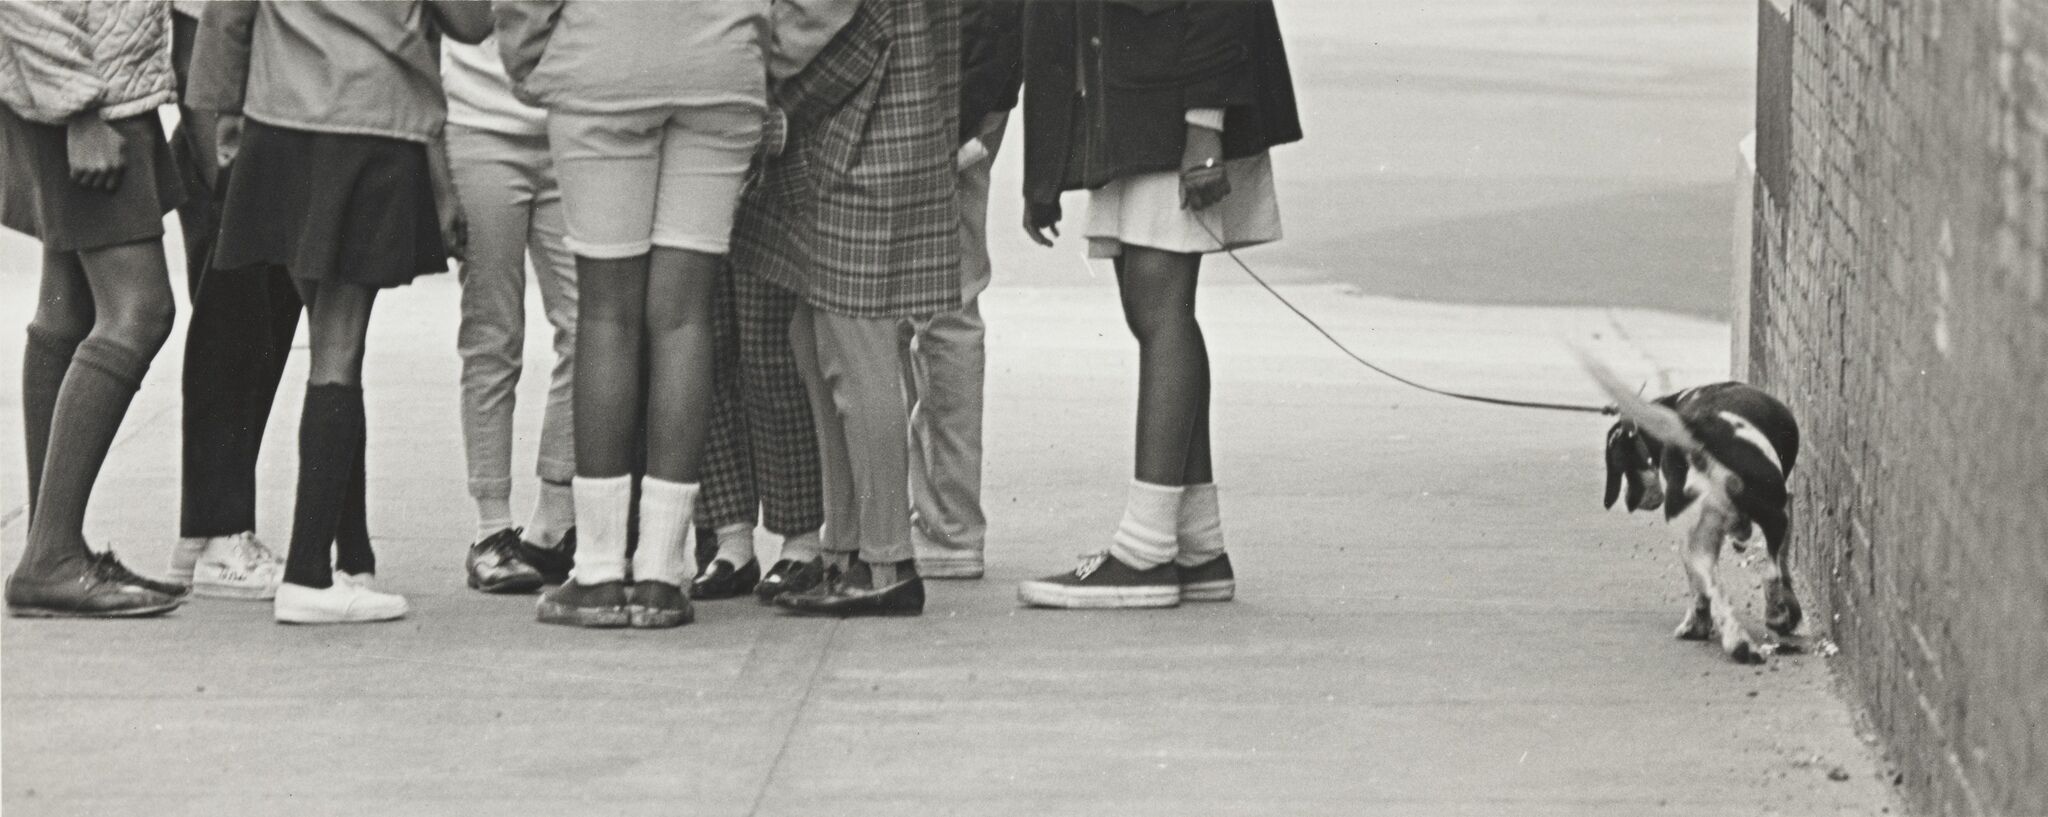 A group of girls huddled together on the sidewalk. One is holding a leash attached to a dog. 